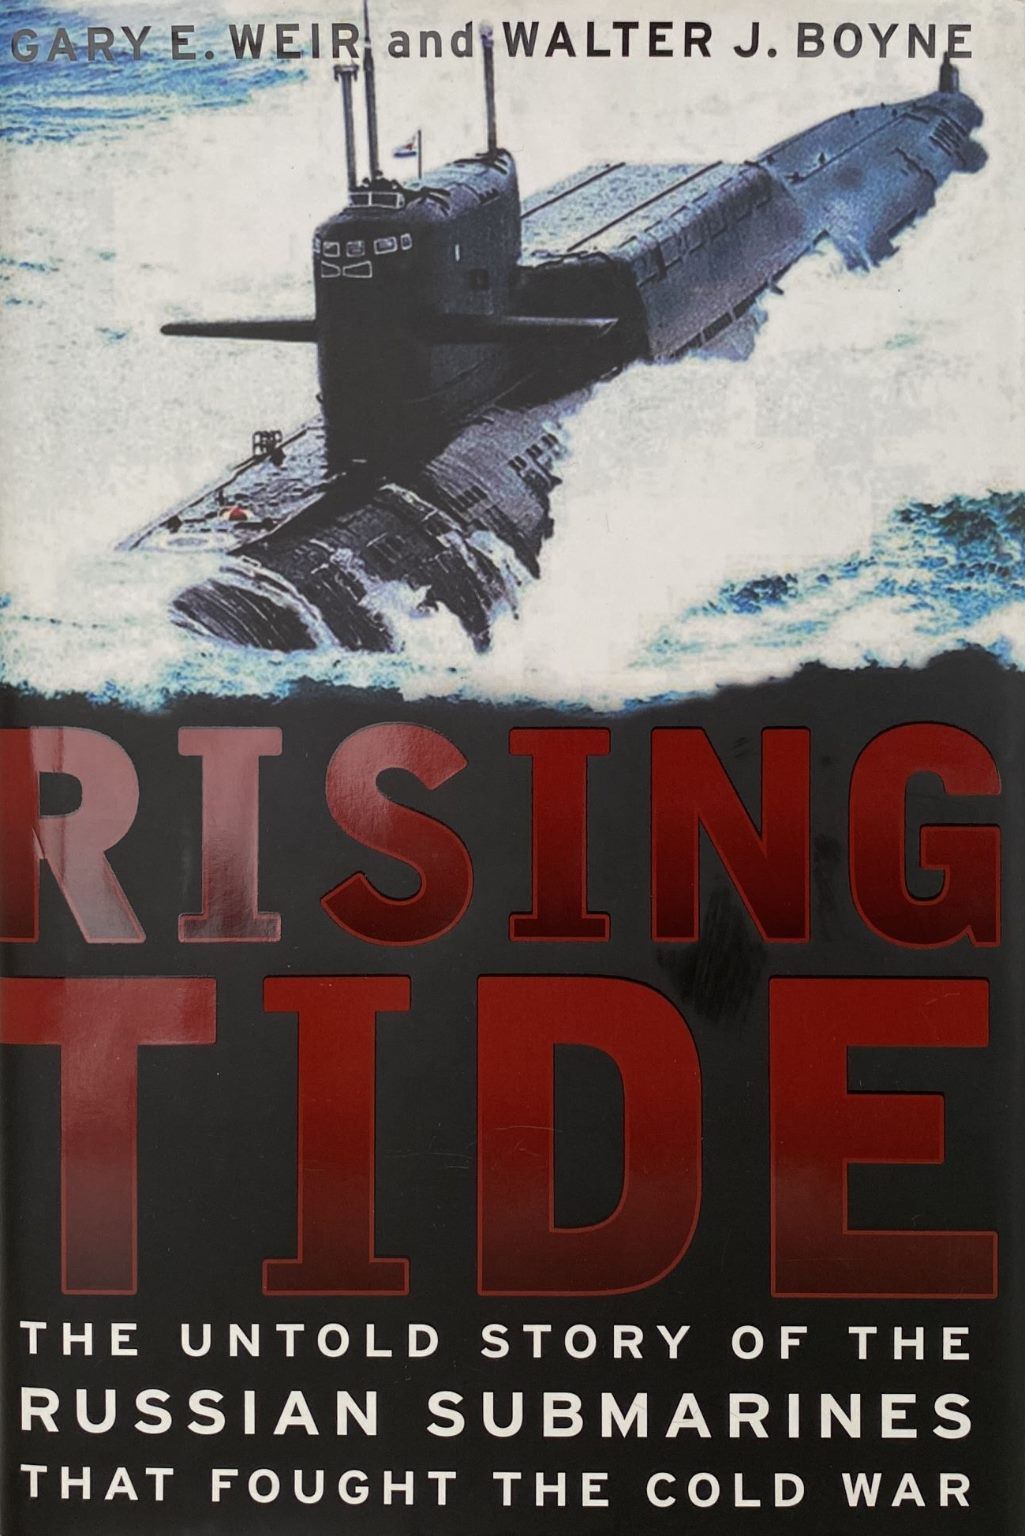 RISING TIDE: The Untold Story of the Russian Submarines that fought the Cold War